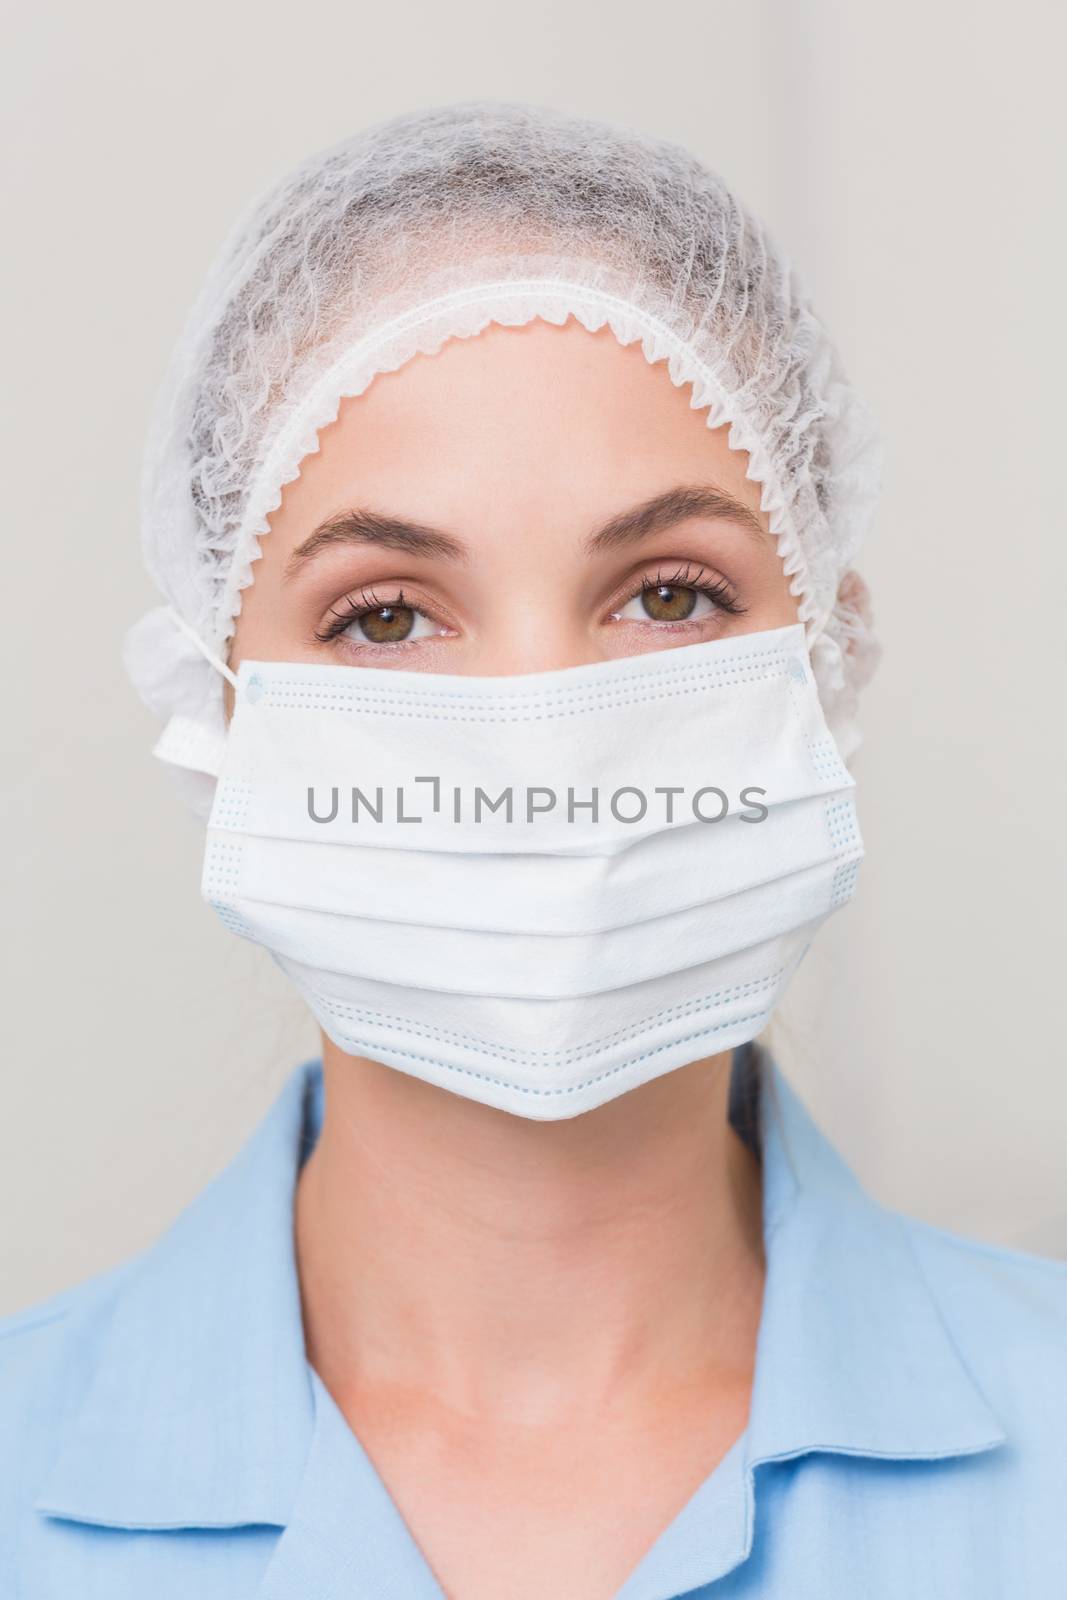 Dentist in surgical mask and cap looking at camera by Wavebreakmedia